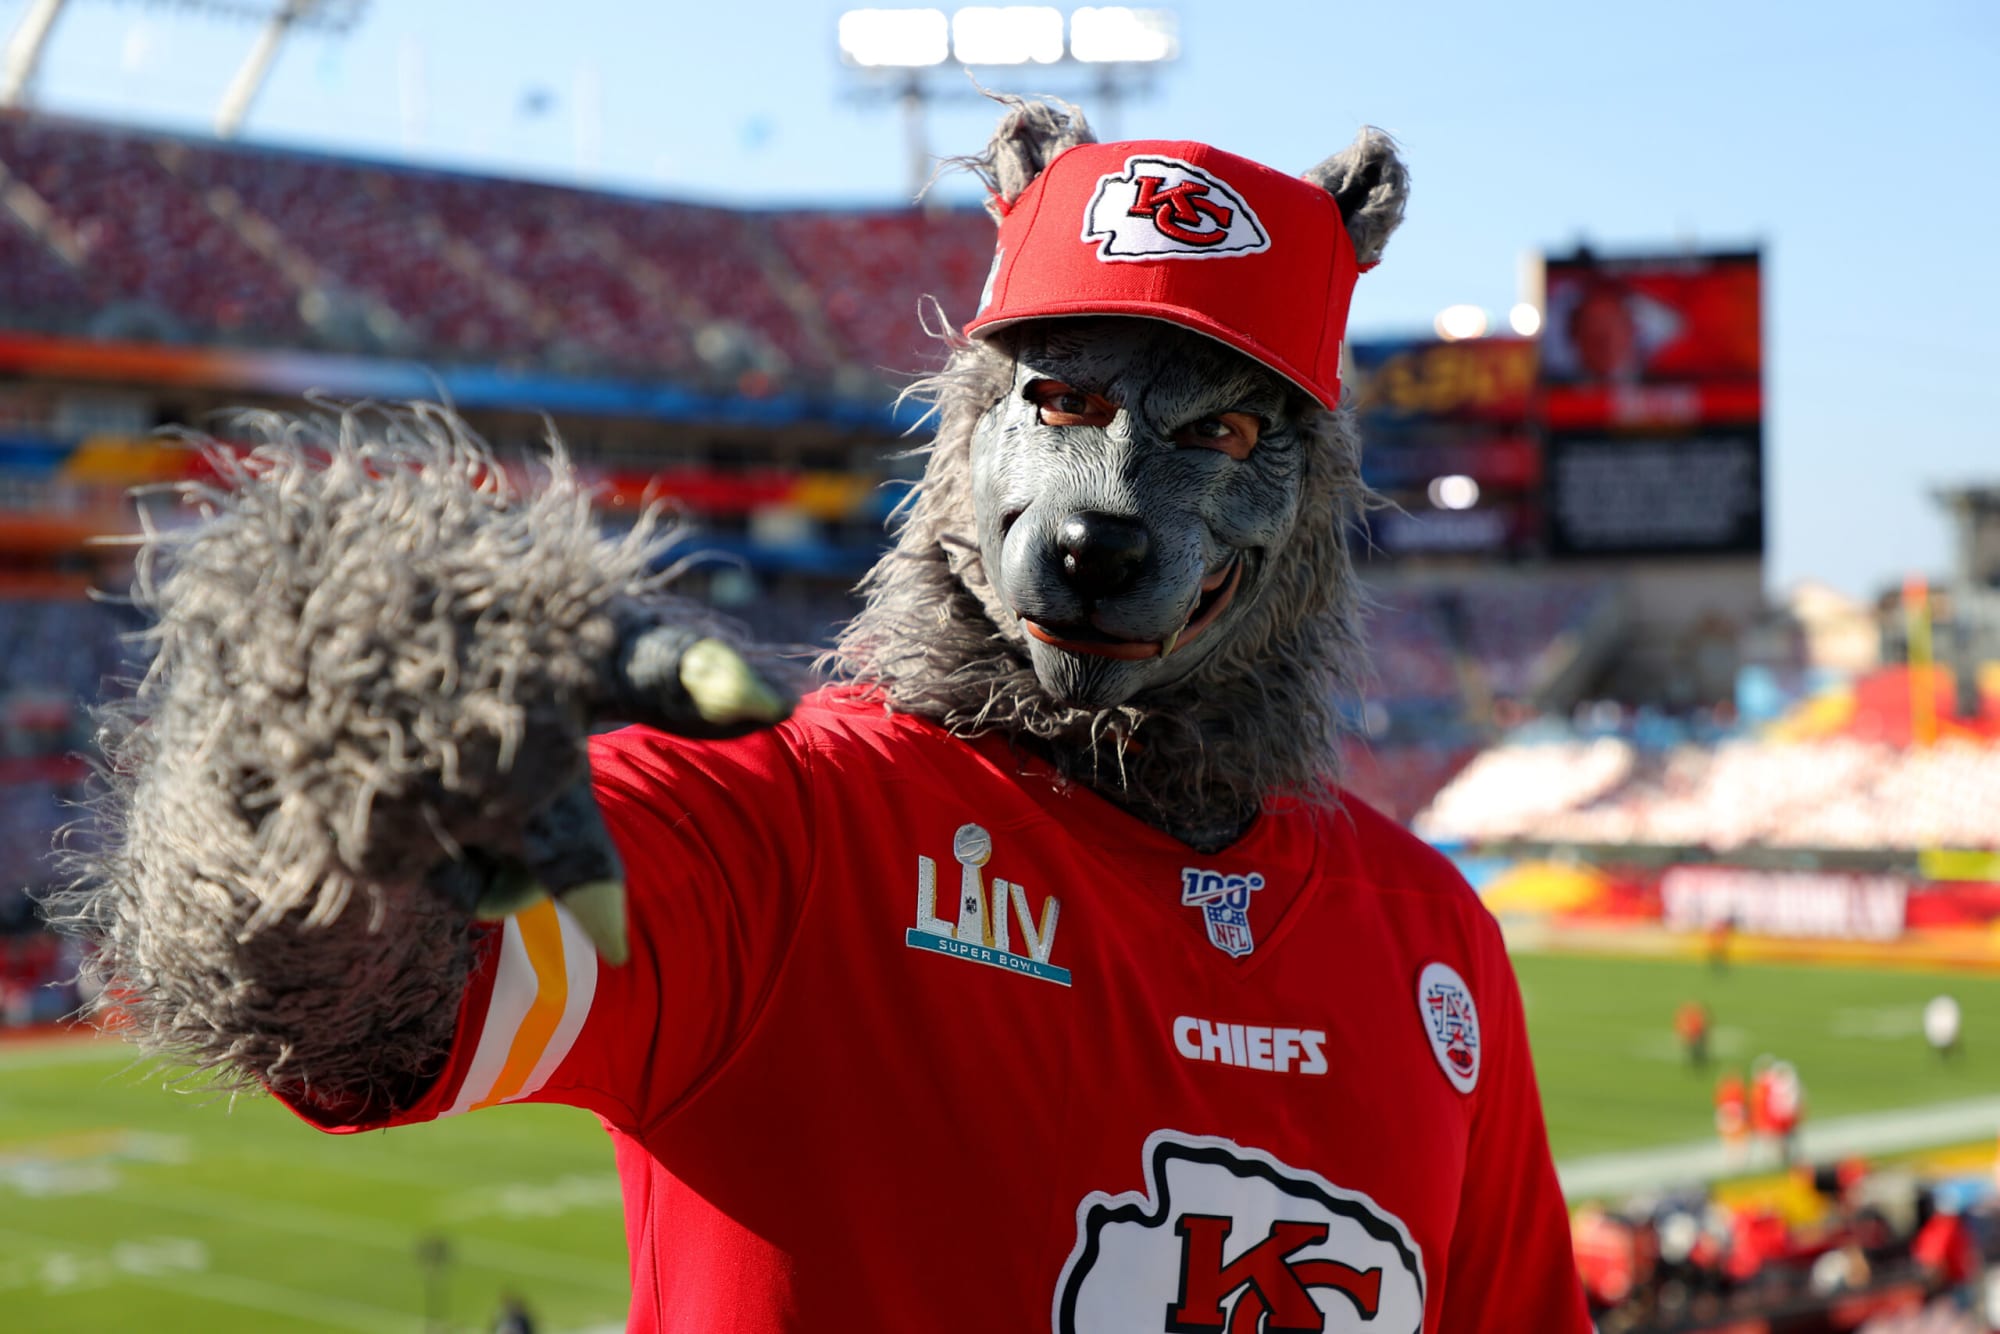 Where is Chiefsaholic? Police take steps to find criminal Chiefs superfan